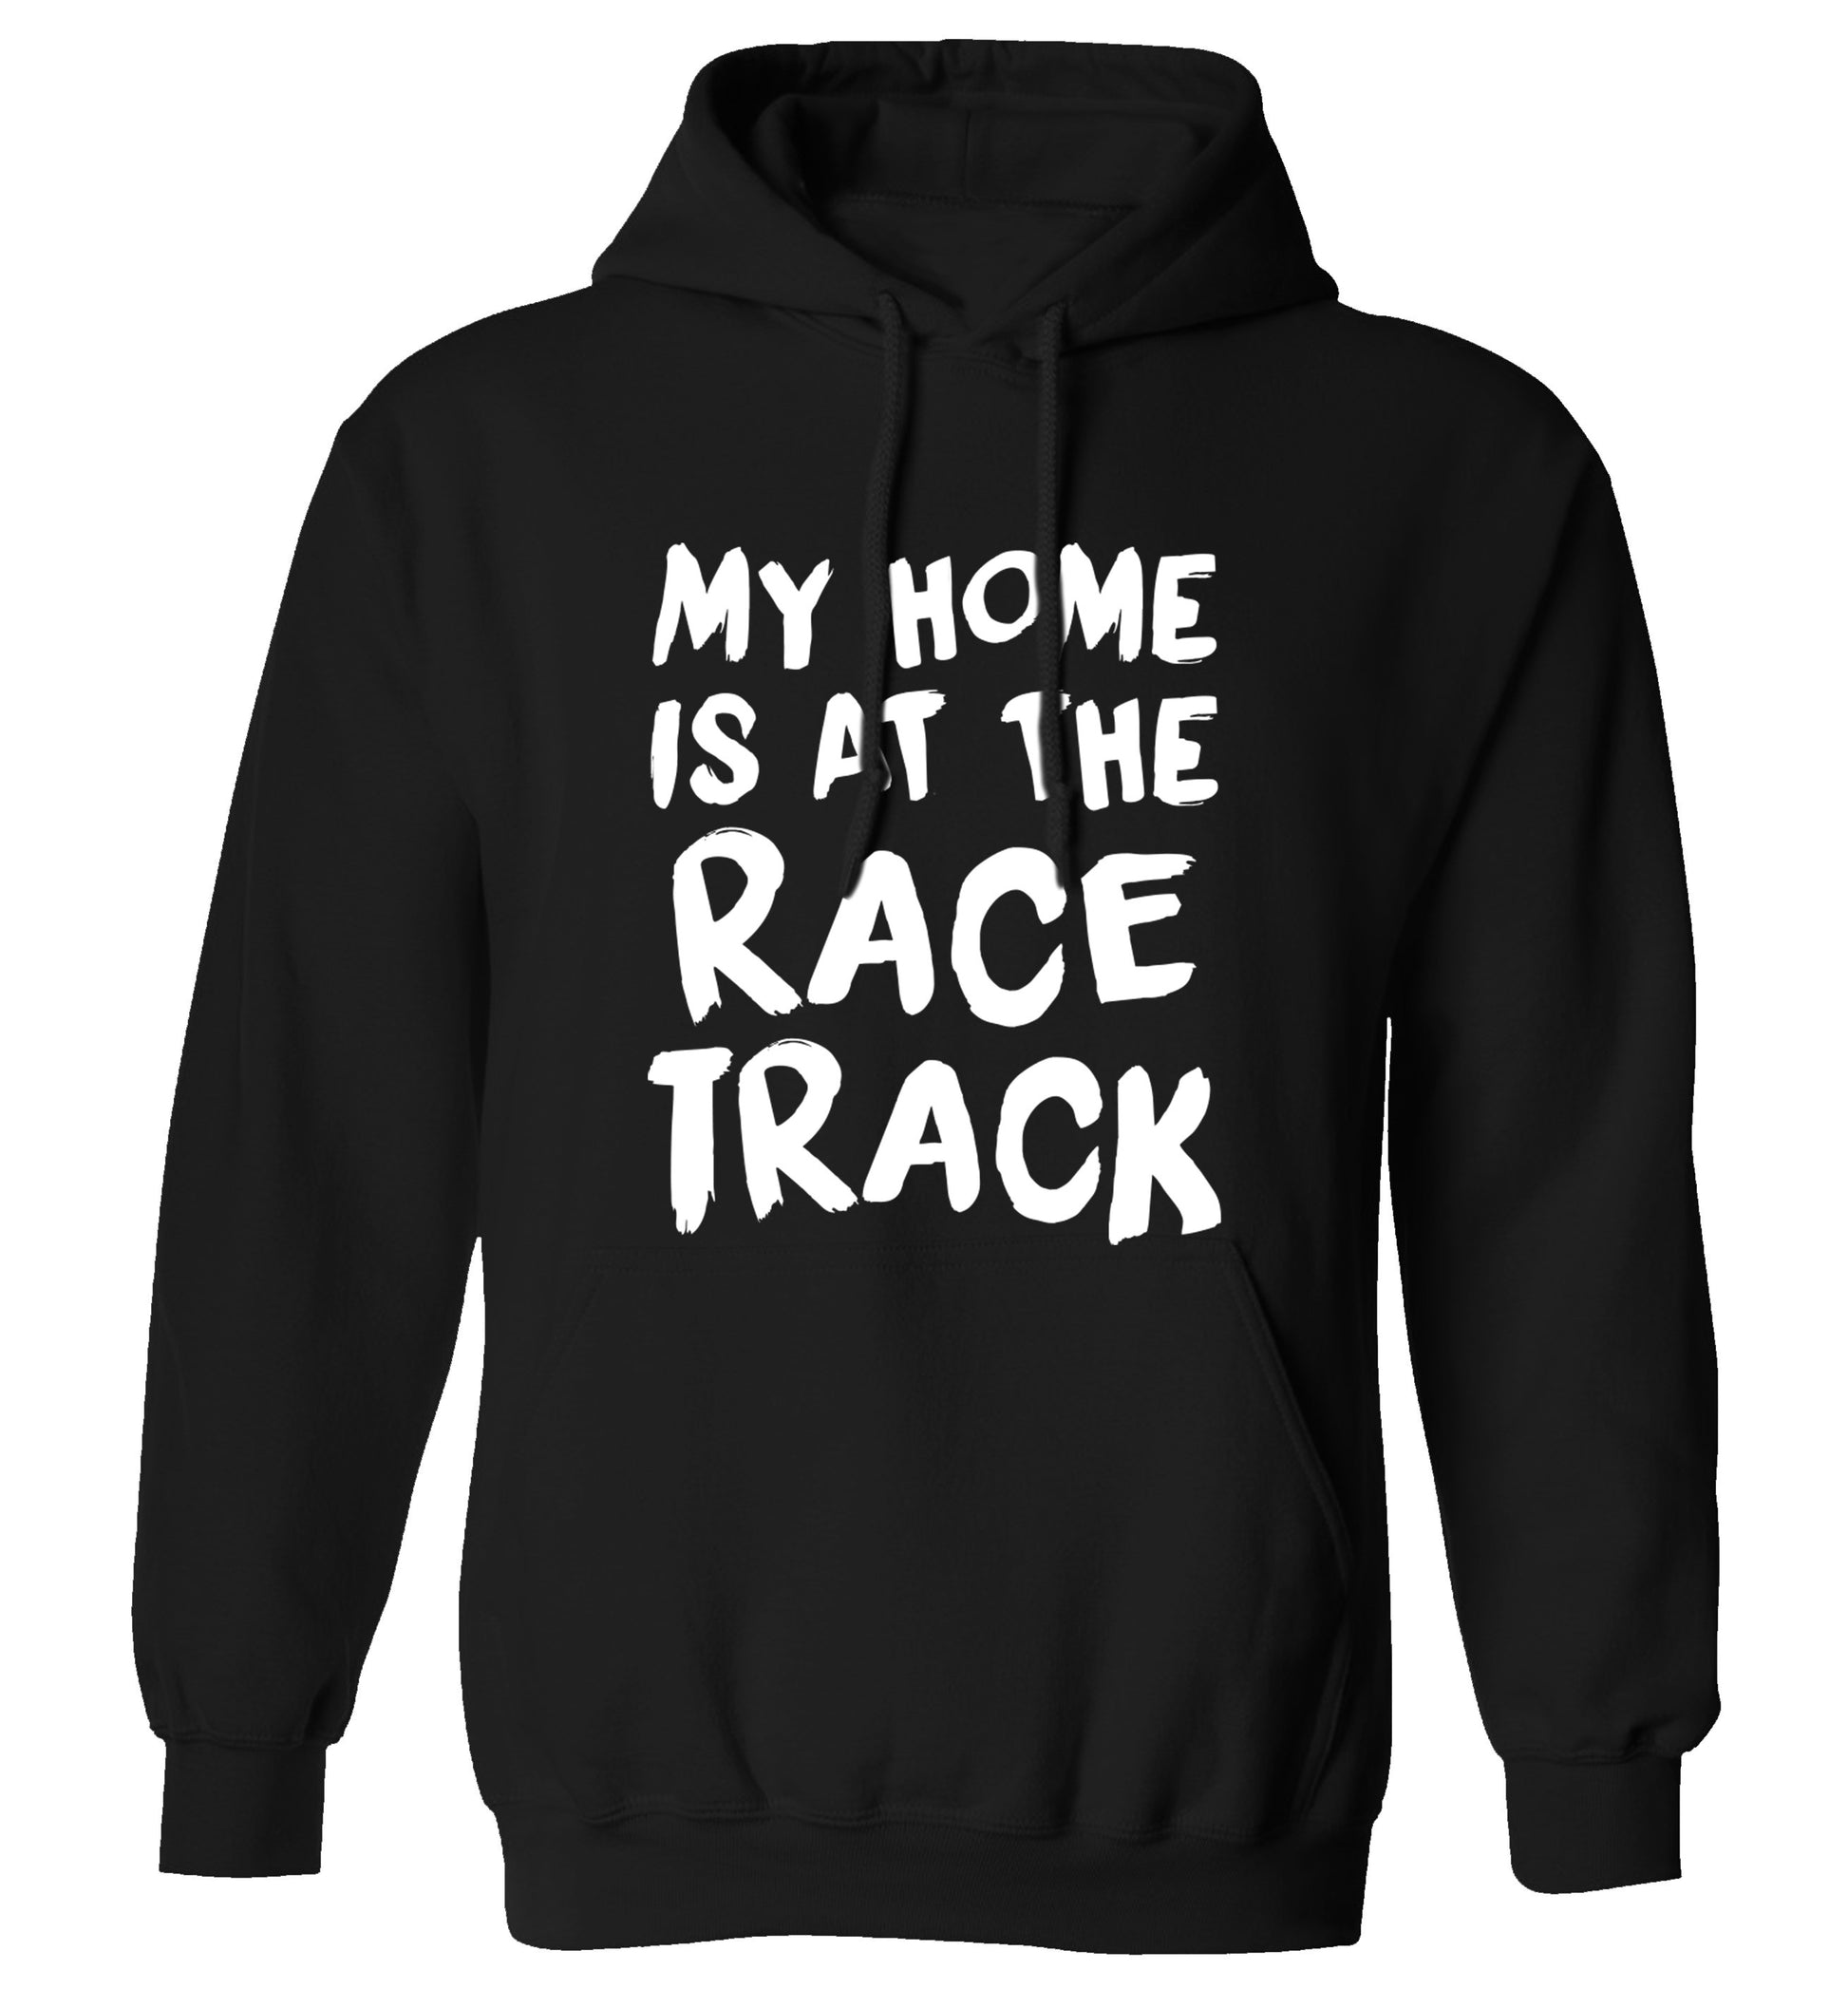 My home is at the race track adults unisex black hoodie 2XL